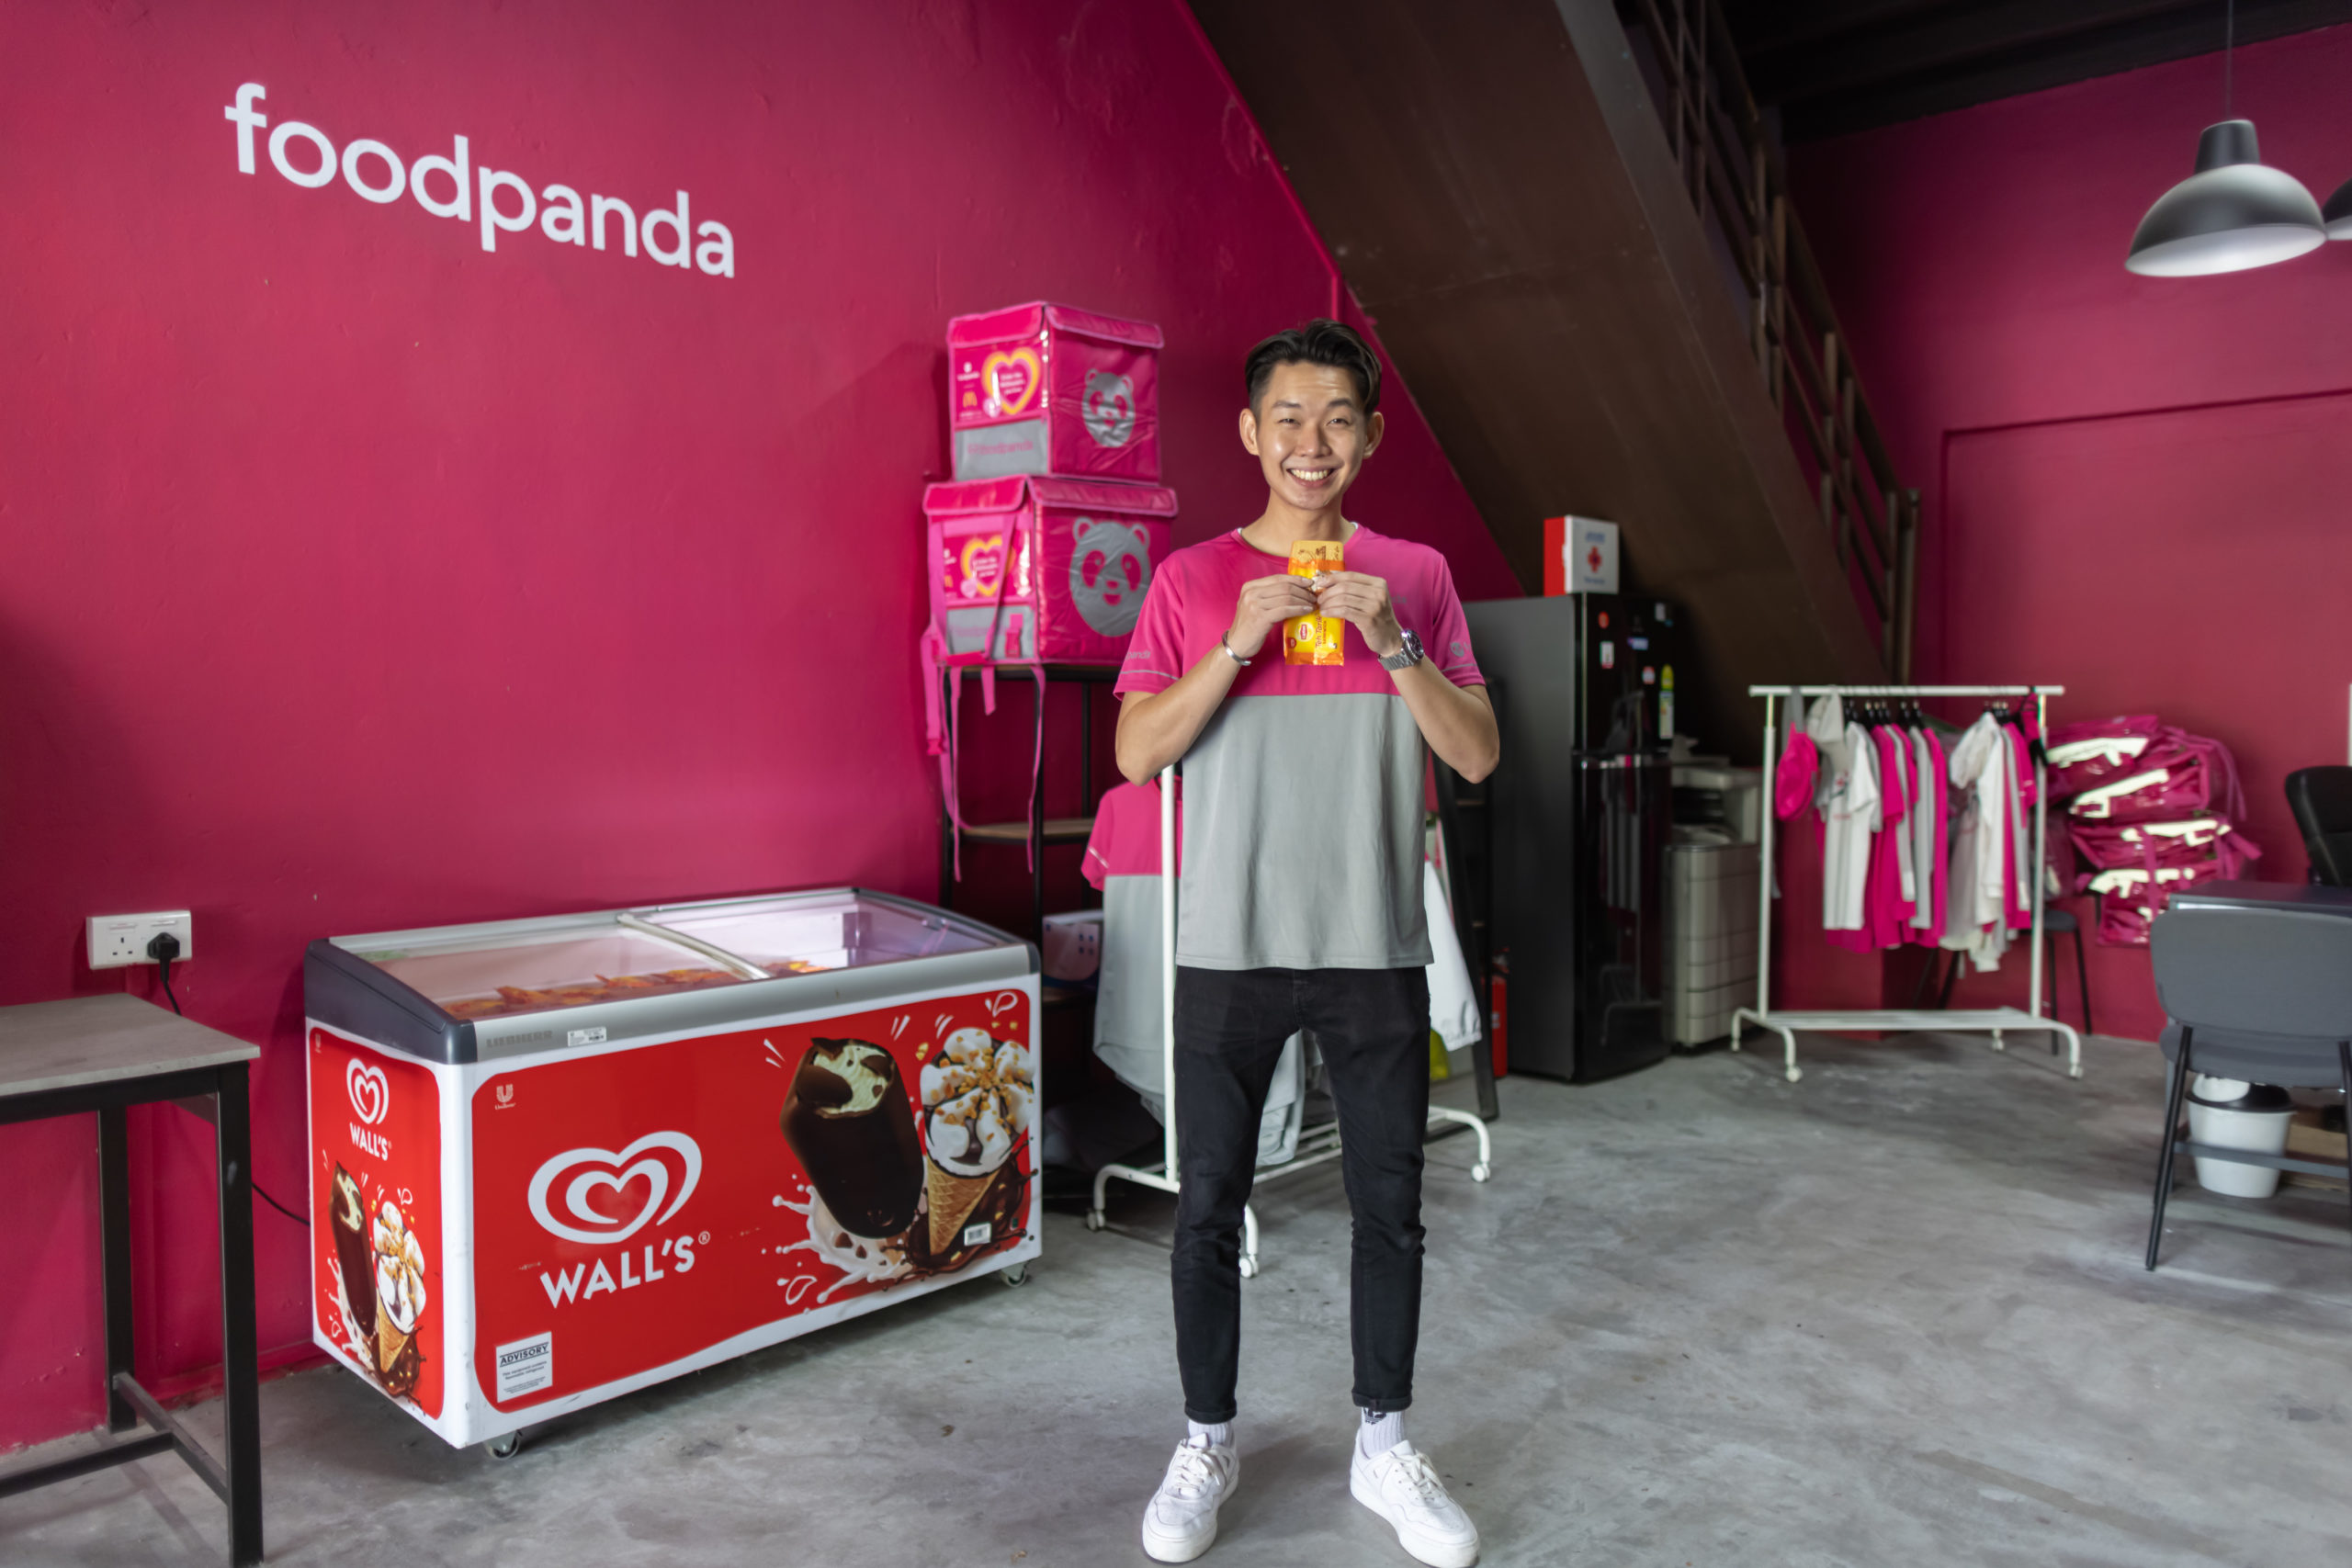 foodpanda and Unilever announce partnership to expand on-demand ice-cream delivery across Asia through pandamart, Asia’s largest cloud grocery network